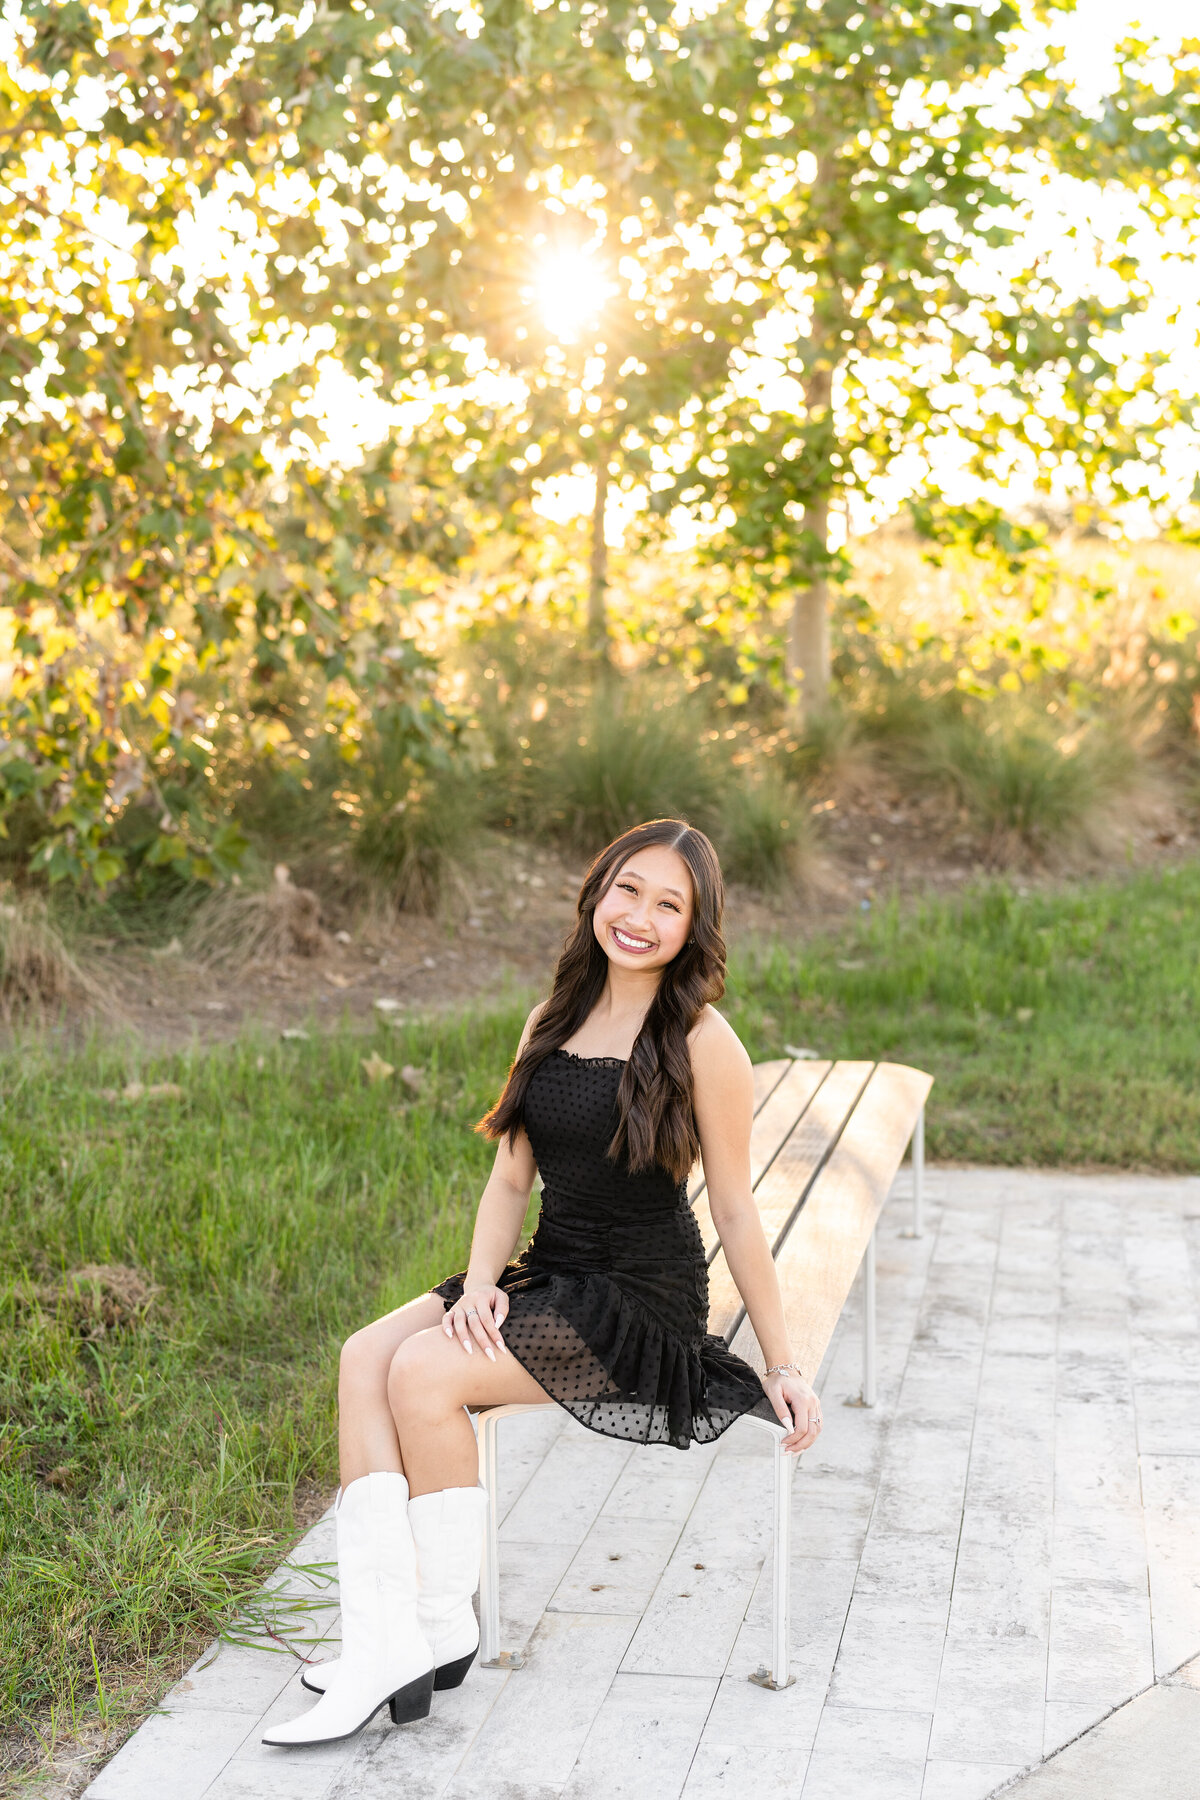 Houston High School senior girl wearing black dress and smiling while sitting on bench surrounded by nature at sunset at Josey Lake Park